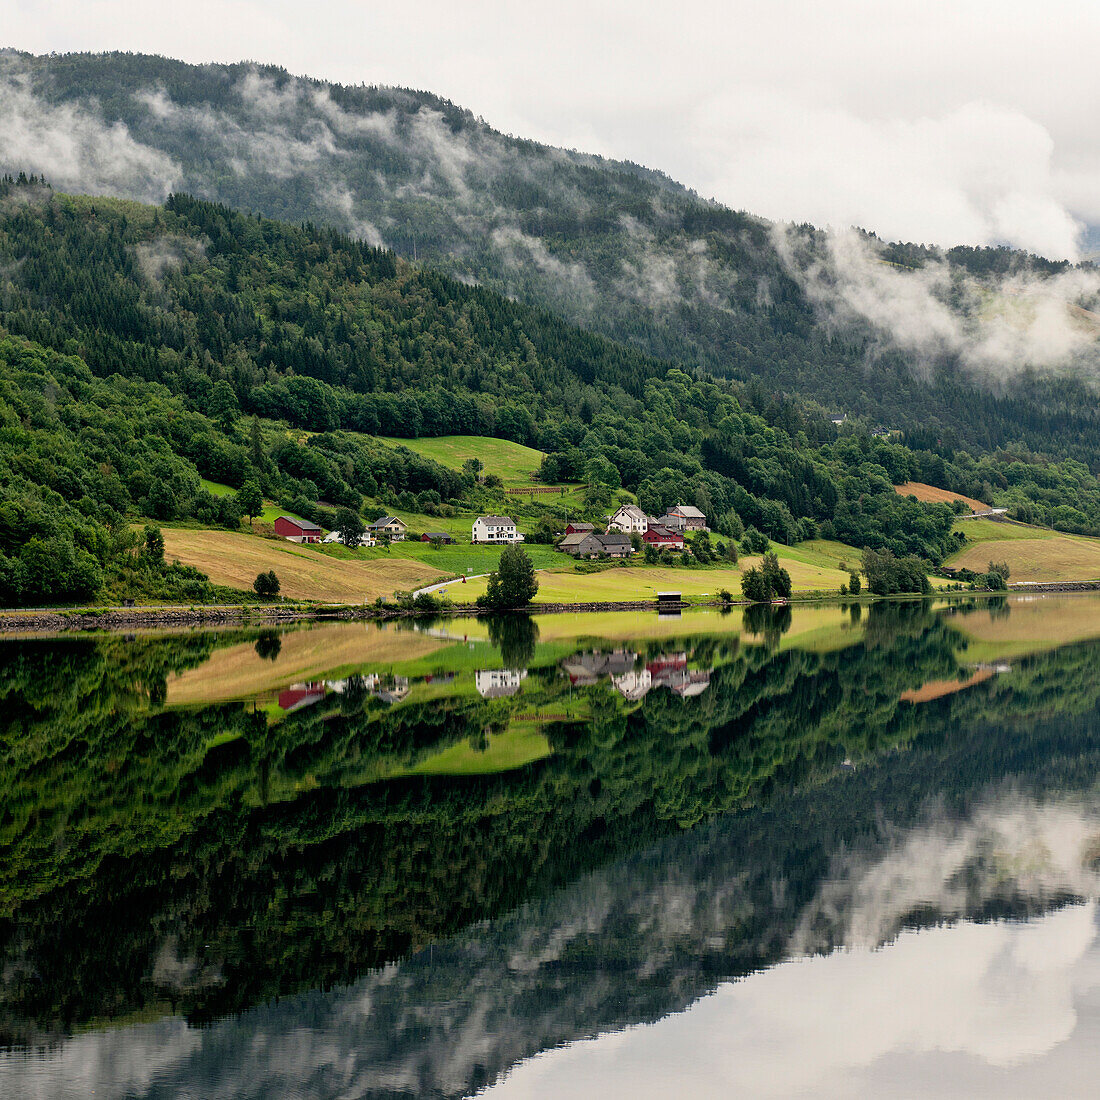 'Houses And A Forest On A Mountainside Reflected In Tranquil Water; Granvin, Norway'